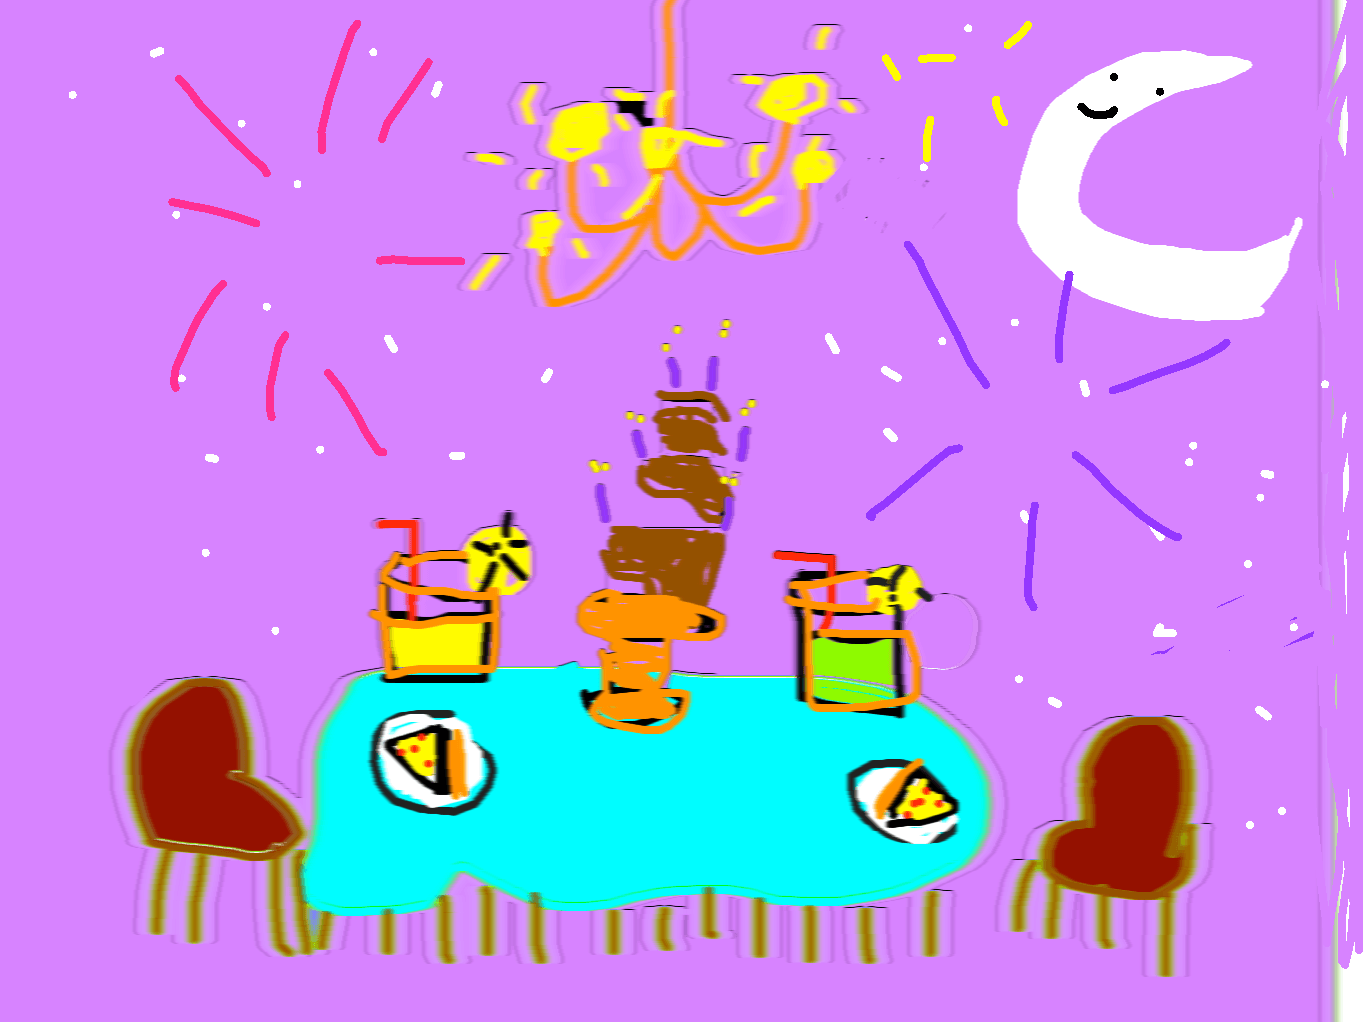 The birthday party